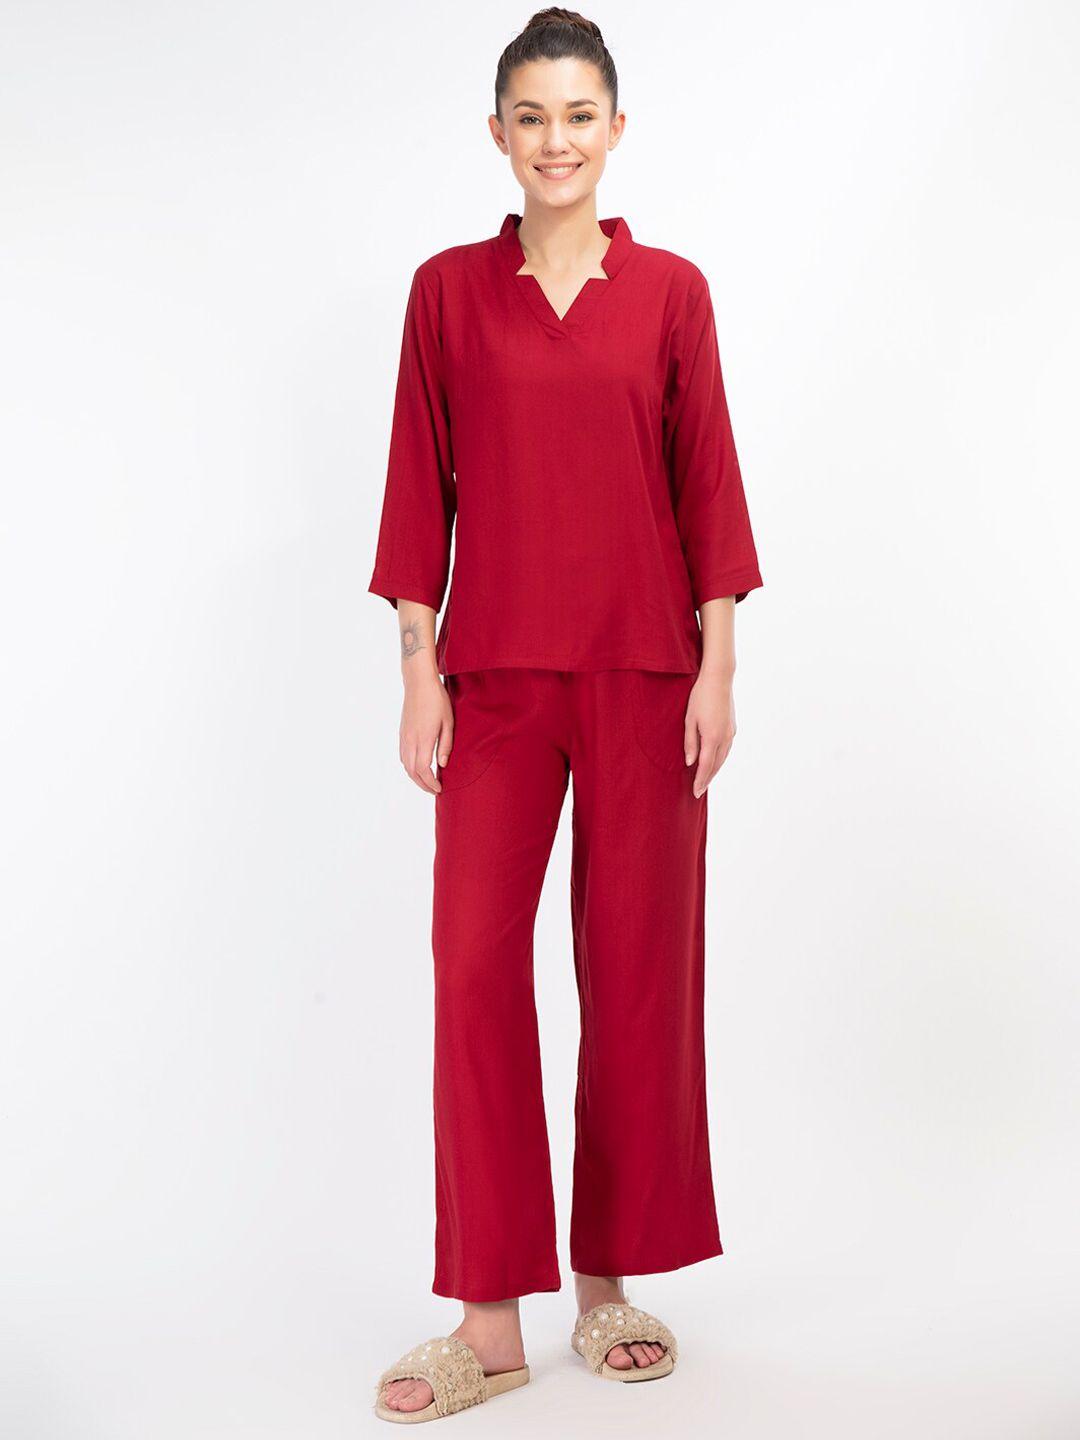 chrome & coral v-neck top with pyjamas night suits